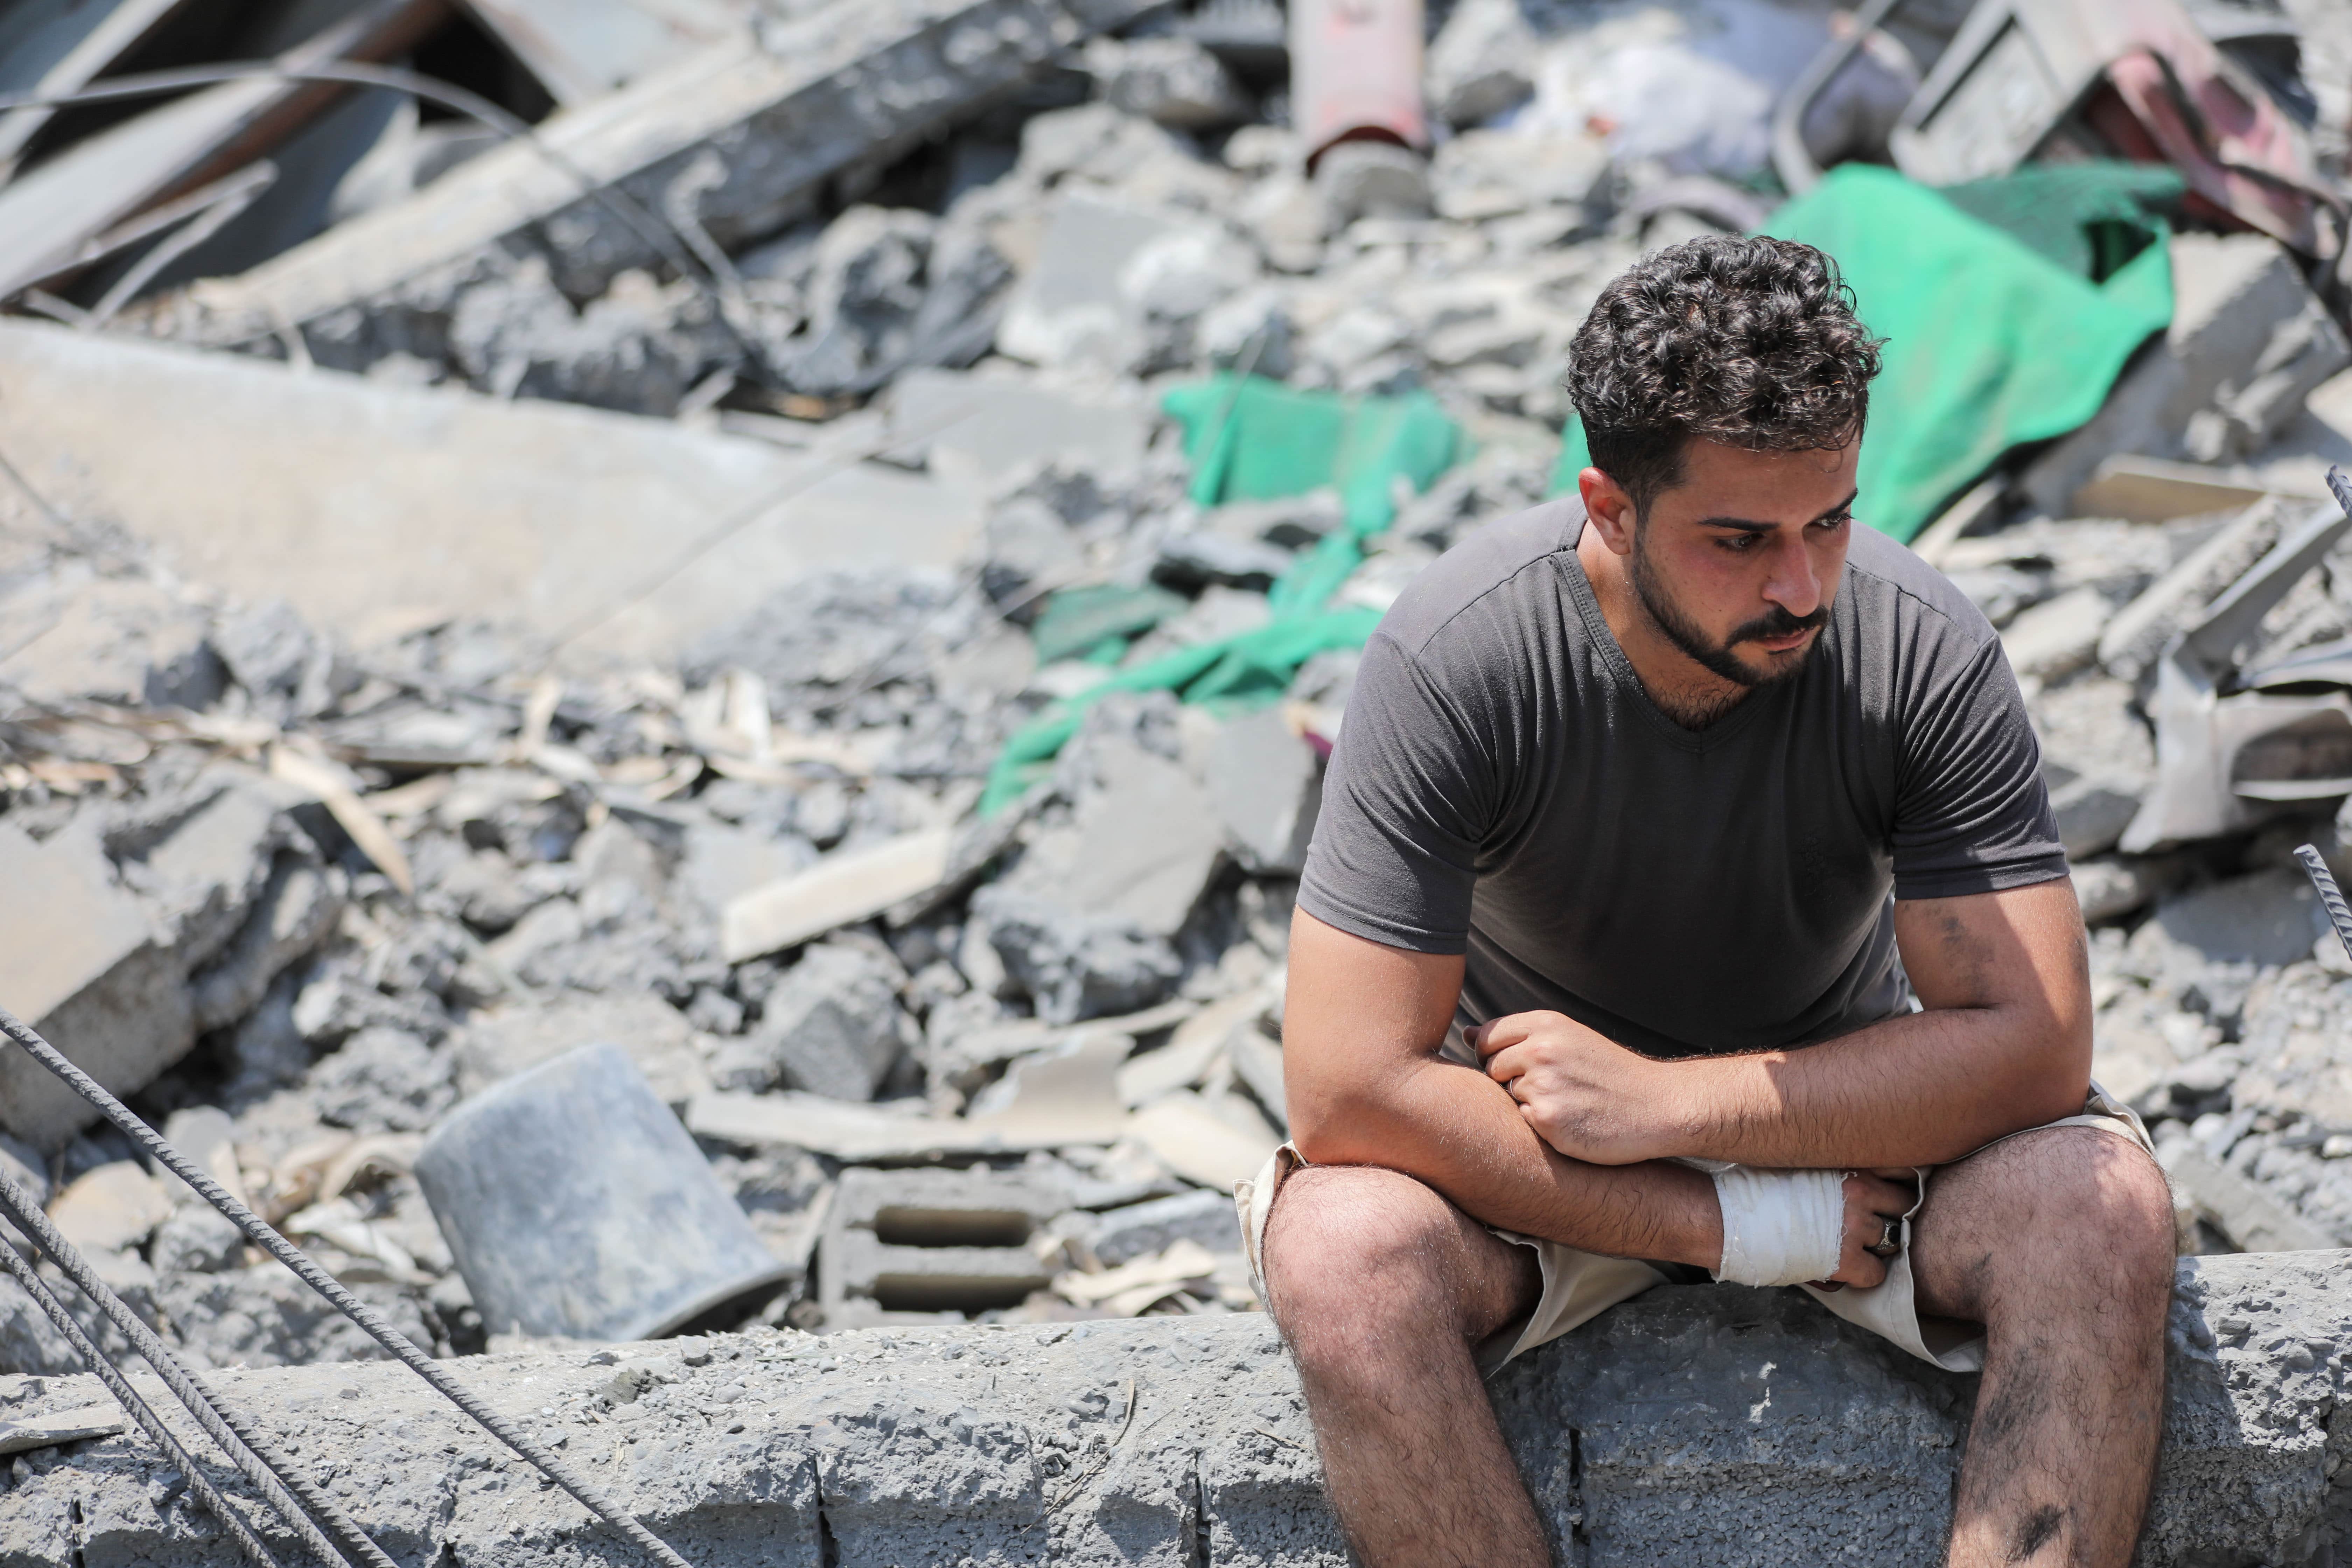 A Palestinian man sit at the rubble of a house flattened by Israeli air strikes in the Gaza Strip on 6 August 2022. (MEE/Mohammed al-Hajjar)